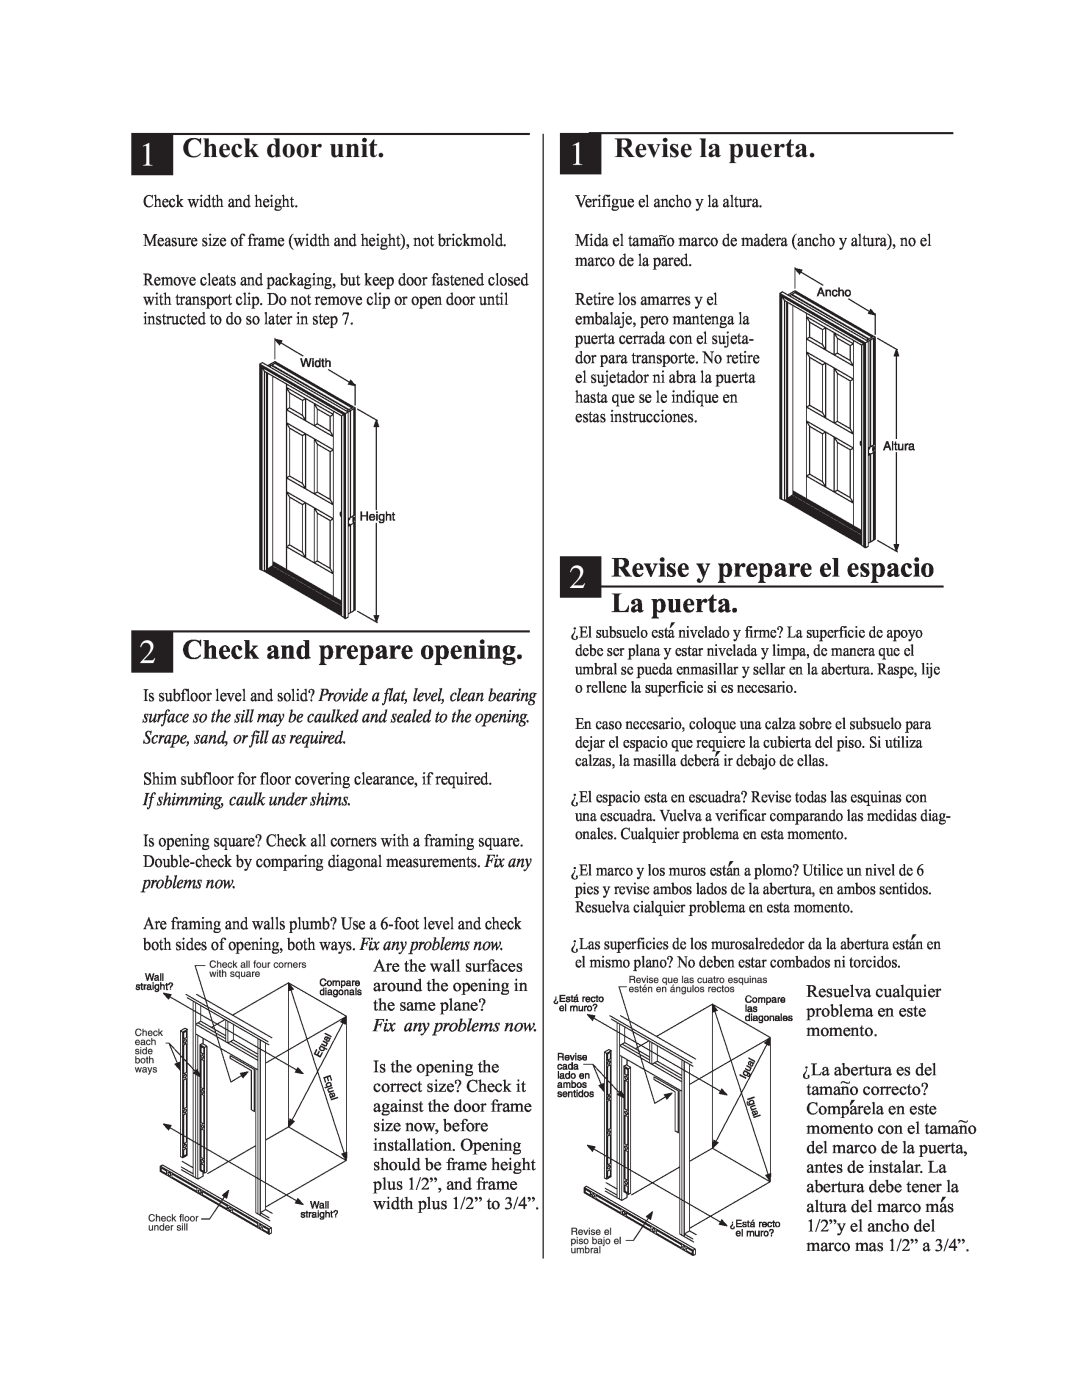 Therma-Tru Pre-hung Door Systems Check door unit, Check and prepare opening, Revise la puerta, Fix any problems now 